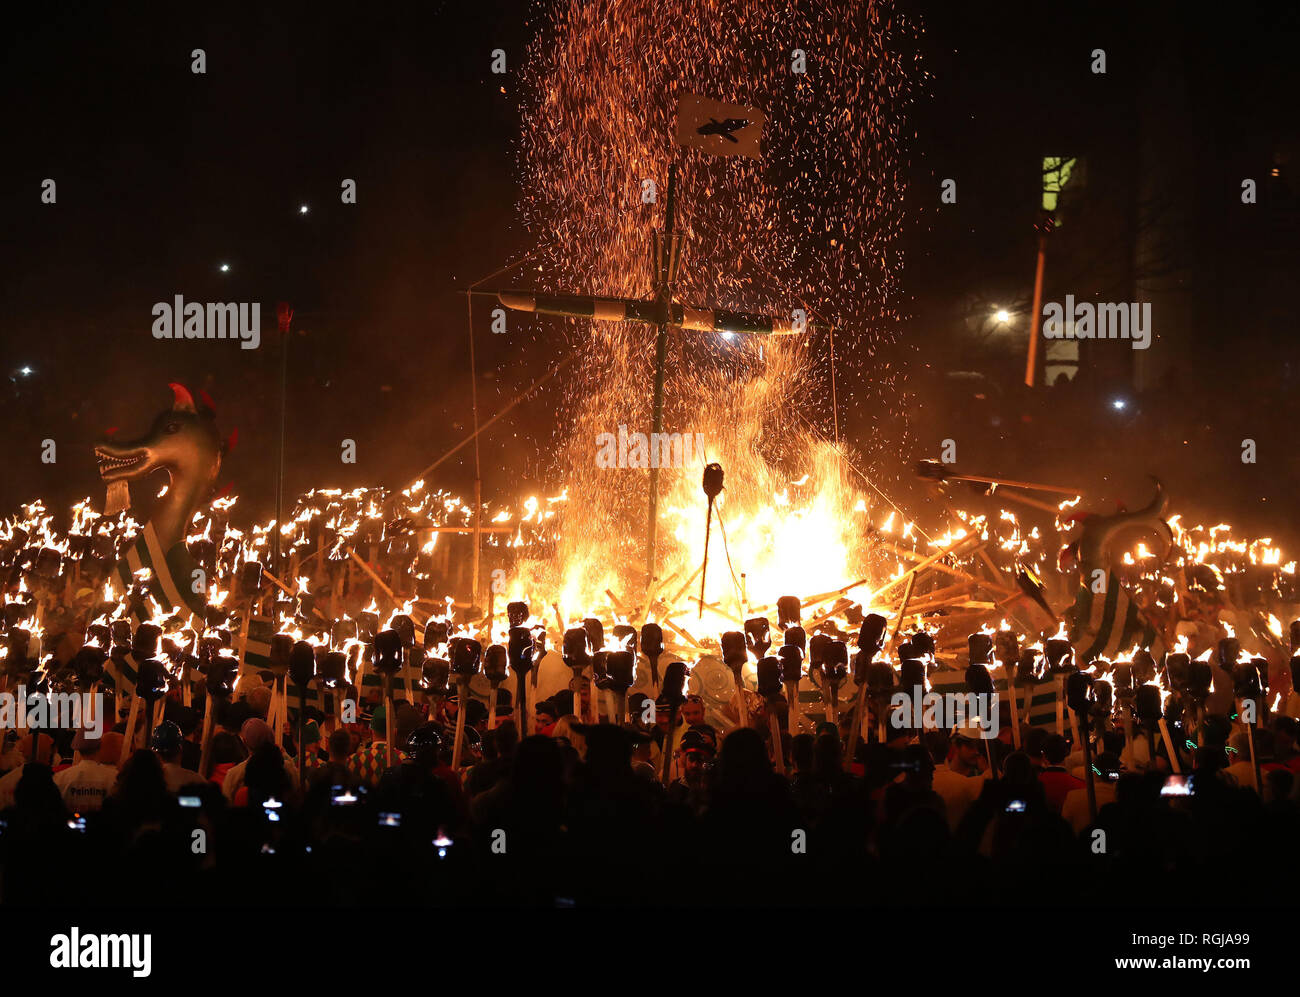 The Galley is set on fire on Shetland Isles during the Up Helly Aa Viking festival. Originating in the 1880s, the festival celebrates Shetland's Norse heritage. Stock Photo